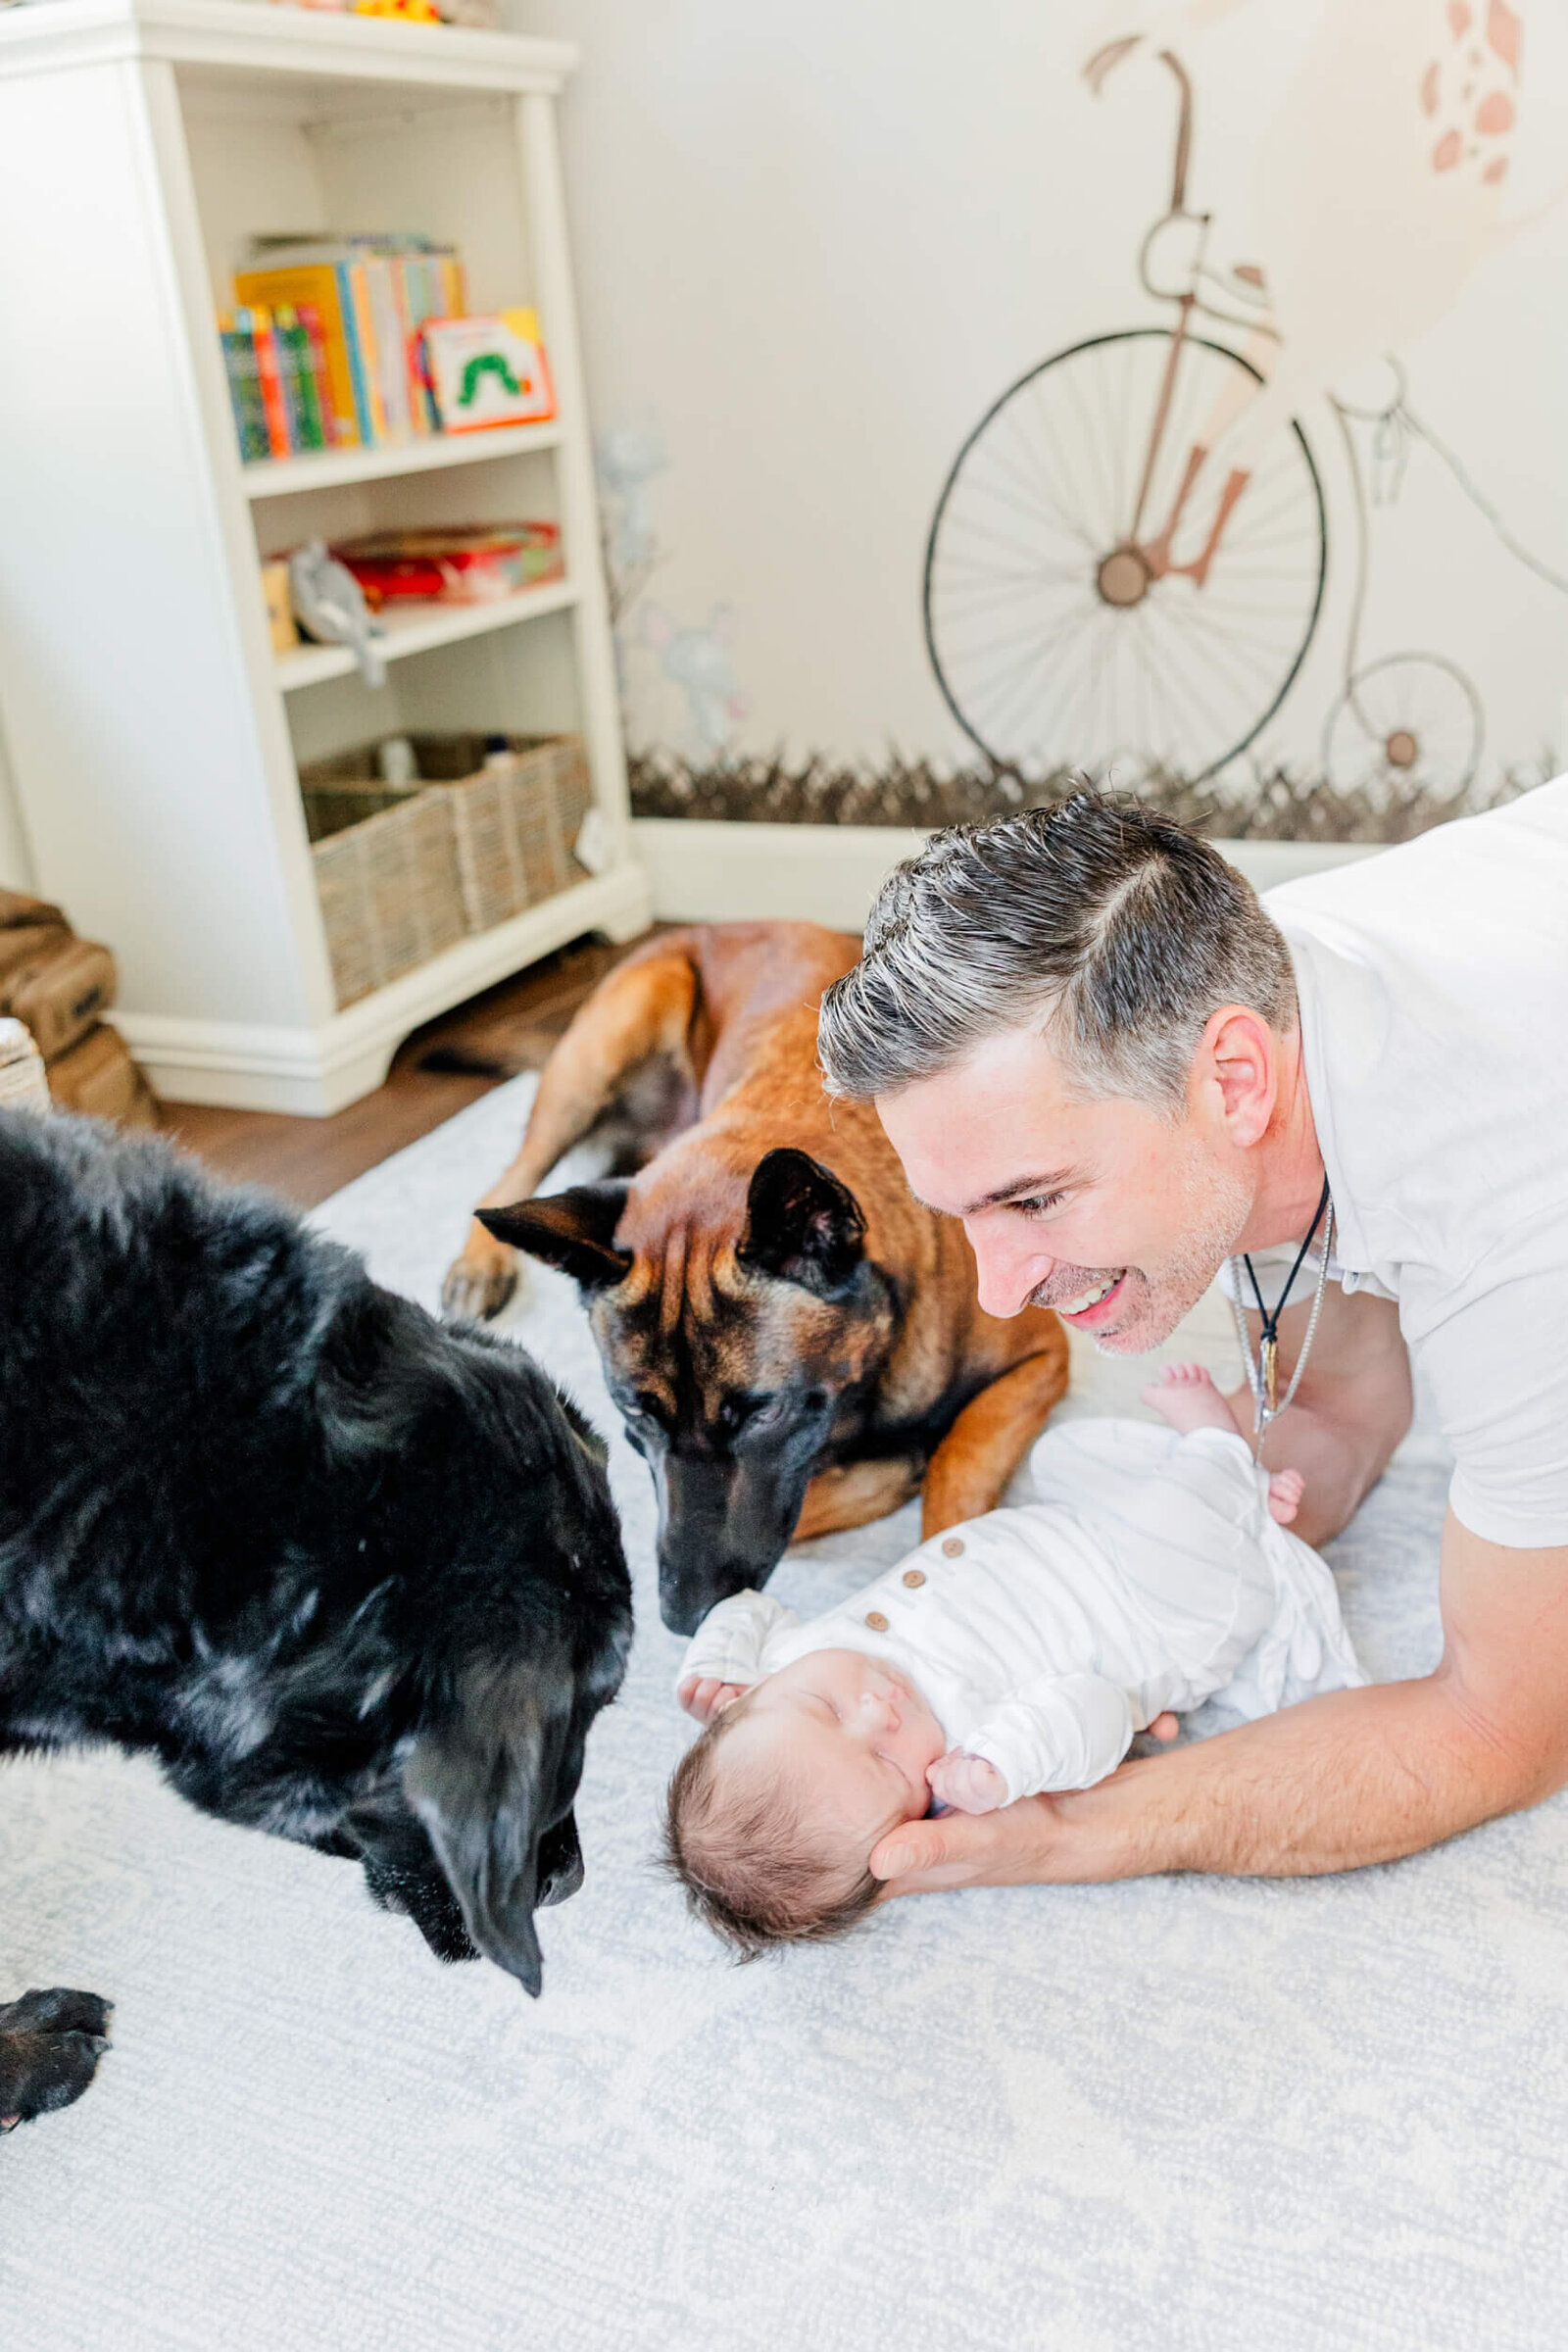 Dad smiles and supports newborn on the floor while two dogs look and sniff curiously